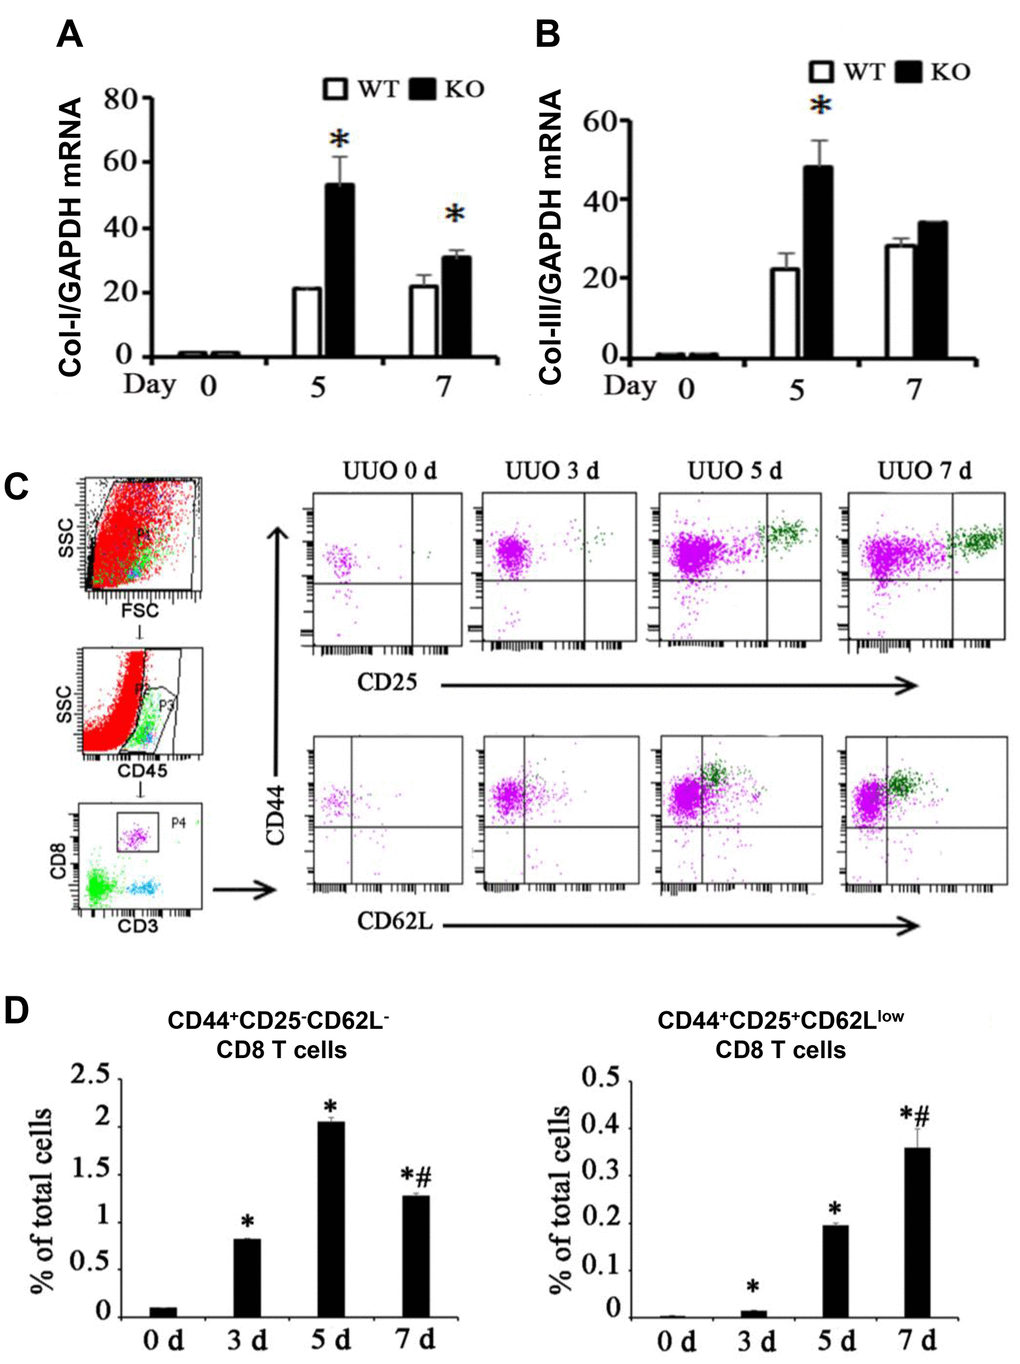 Two different subsets of infiltrating CD8 T cells were related to renal fibrosis in UUO model mice. (A, B) Total mRNA was obtained from the UUO kidneys of WT mice, CD8 KO mice, or CD8 KO mice transplanted with CD8 T cells at days 0, 5, and 7. The results showed the expression levels of Col-I and Col-III in CD8 KO mice compared with those in WT mice. (*p C) Representative examples of FACS analysis at each point. CD8+ T cells in obstructed kidneys were identified on the basis of CD45, CD3, CD44, CD25, and CD62L expression by using flow cytometry. (D) CD44+CD25−CD62L− and CD44+CD25+CD62Llow CD8+ T cells were counted and analyzed at days 0, 3, 5, and 7 after UUO (*p 